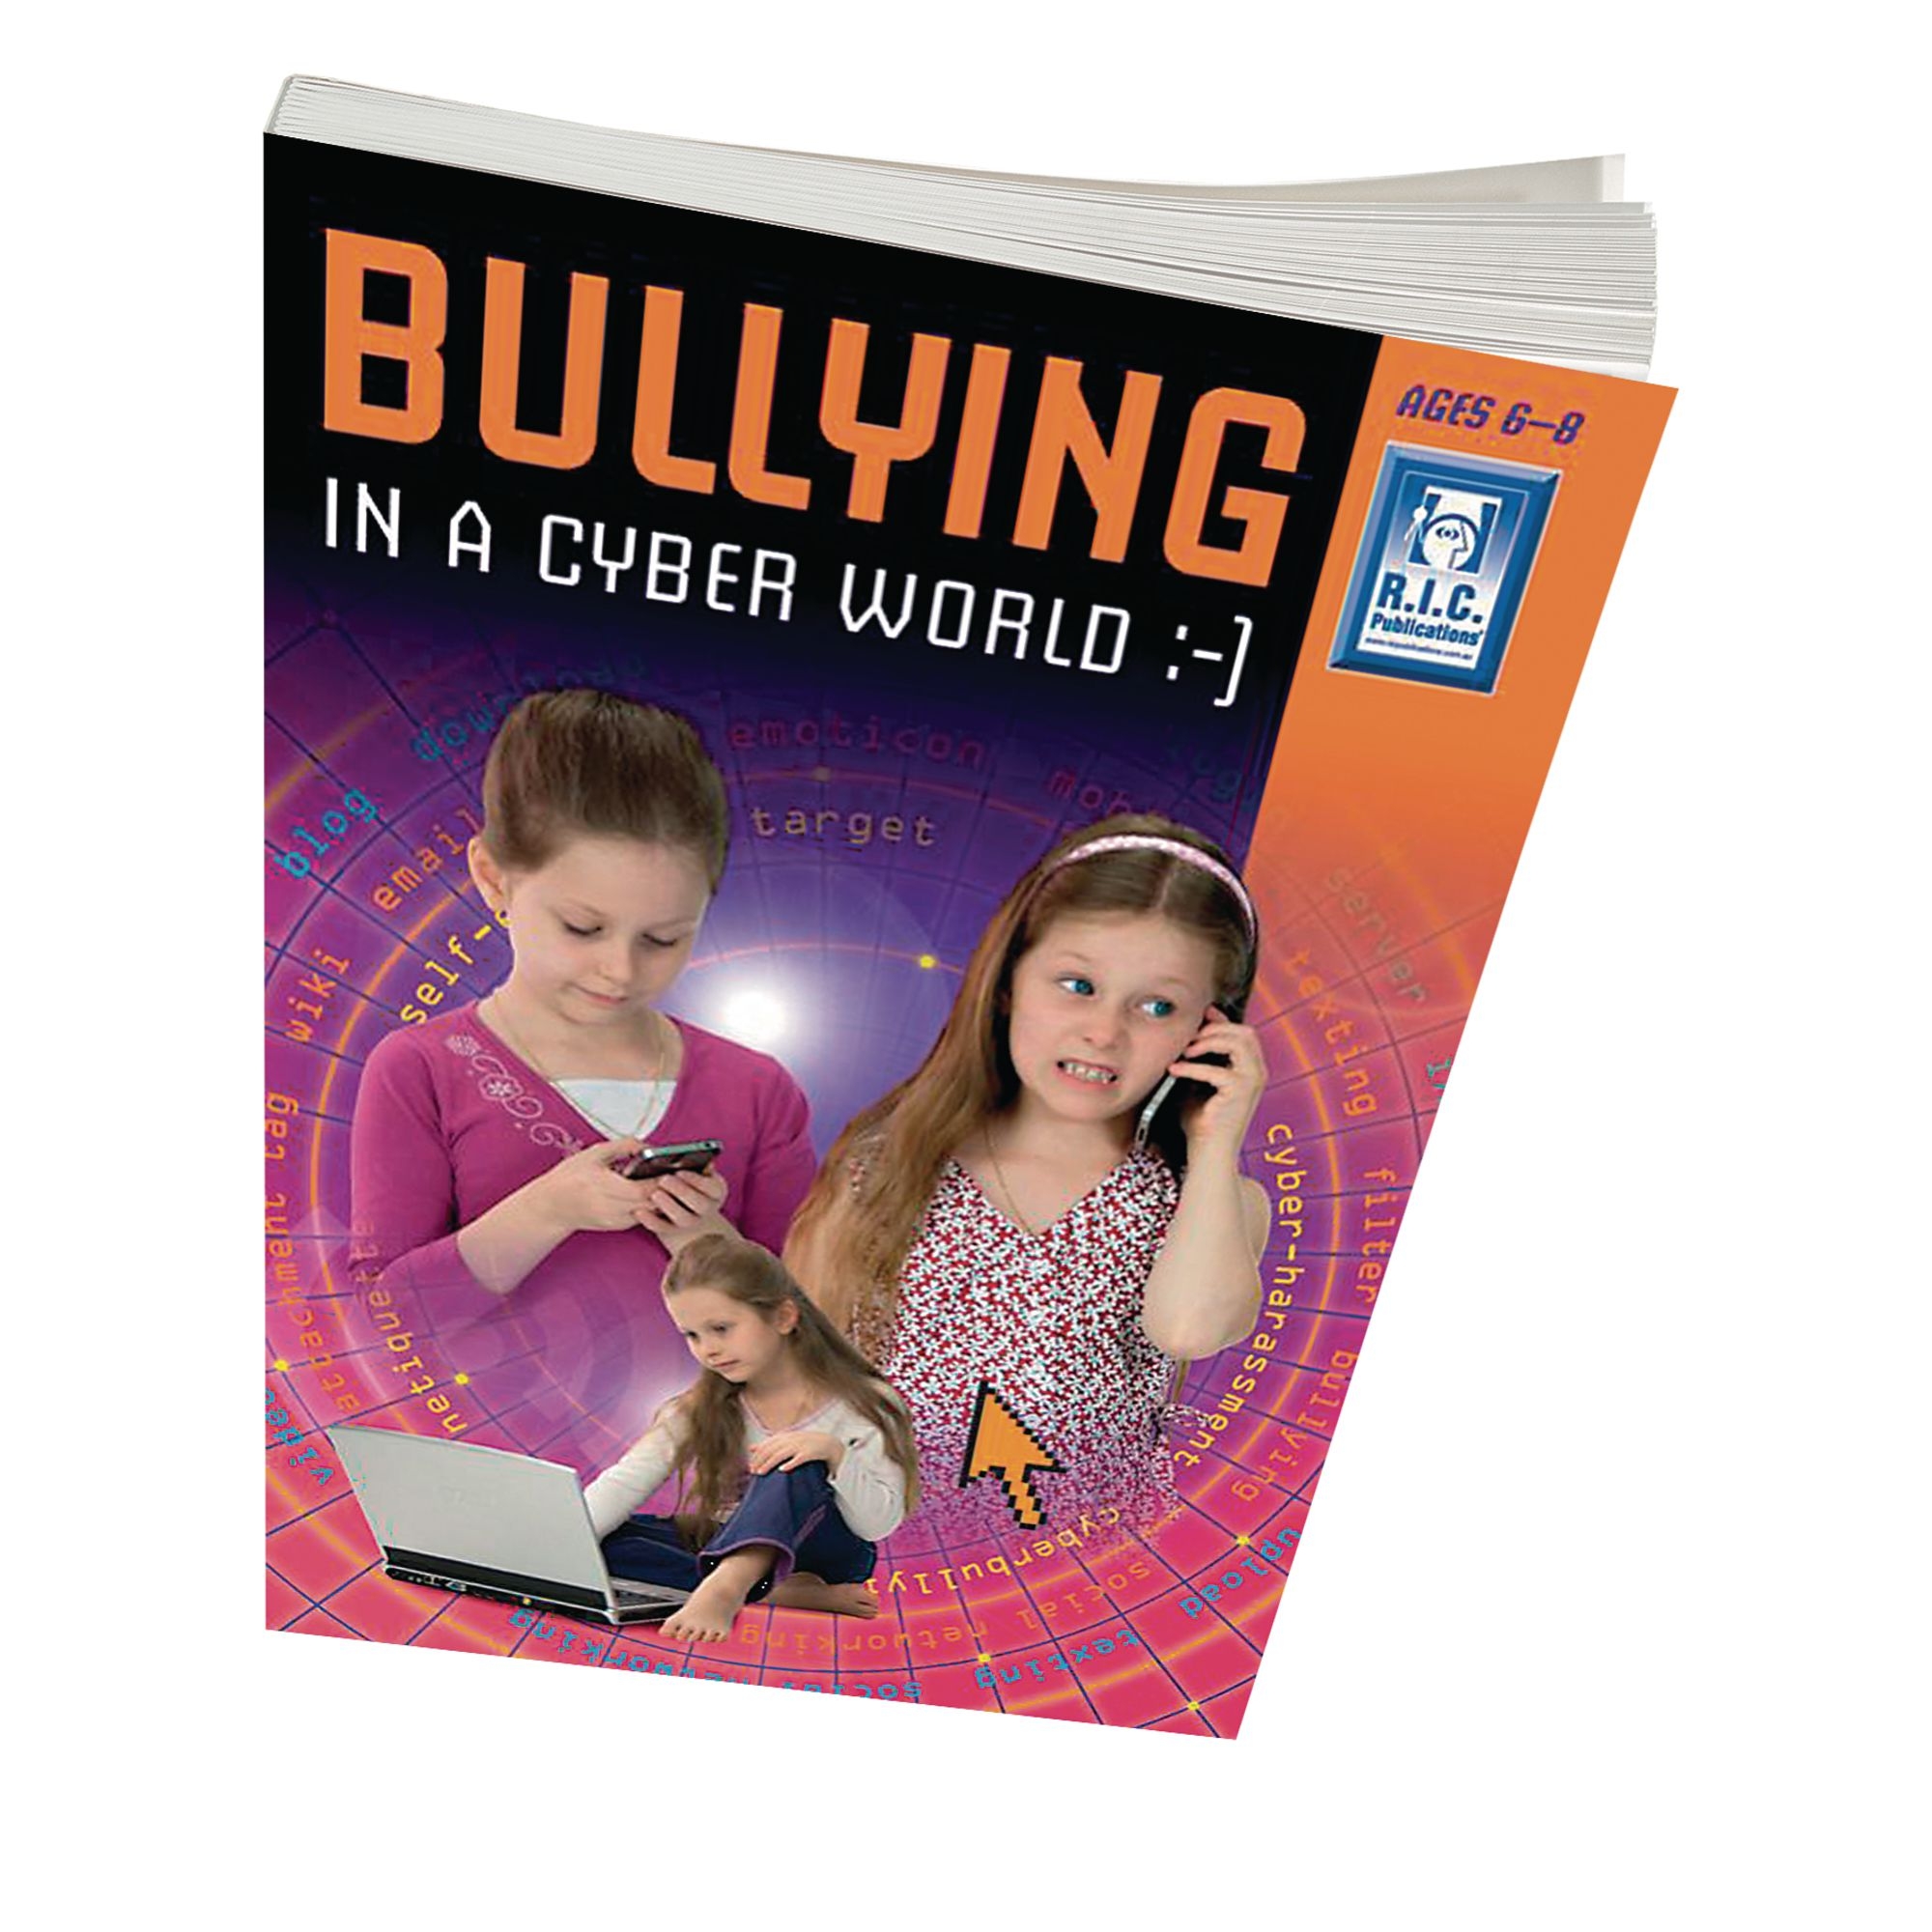 Bullying In a Cyber World - Lower